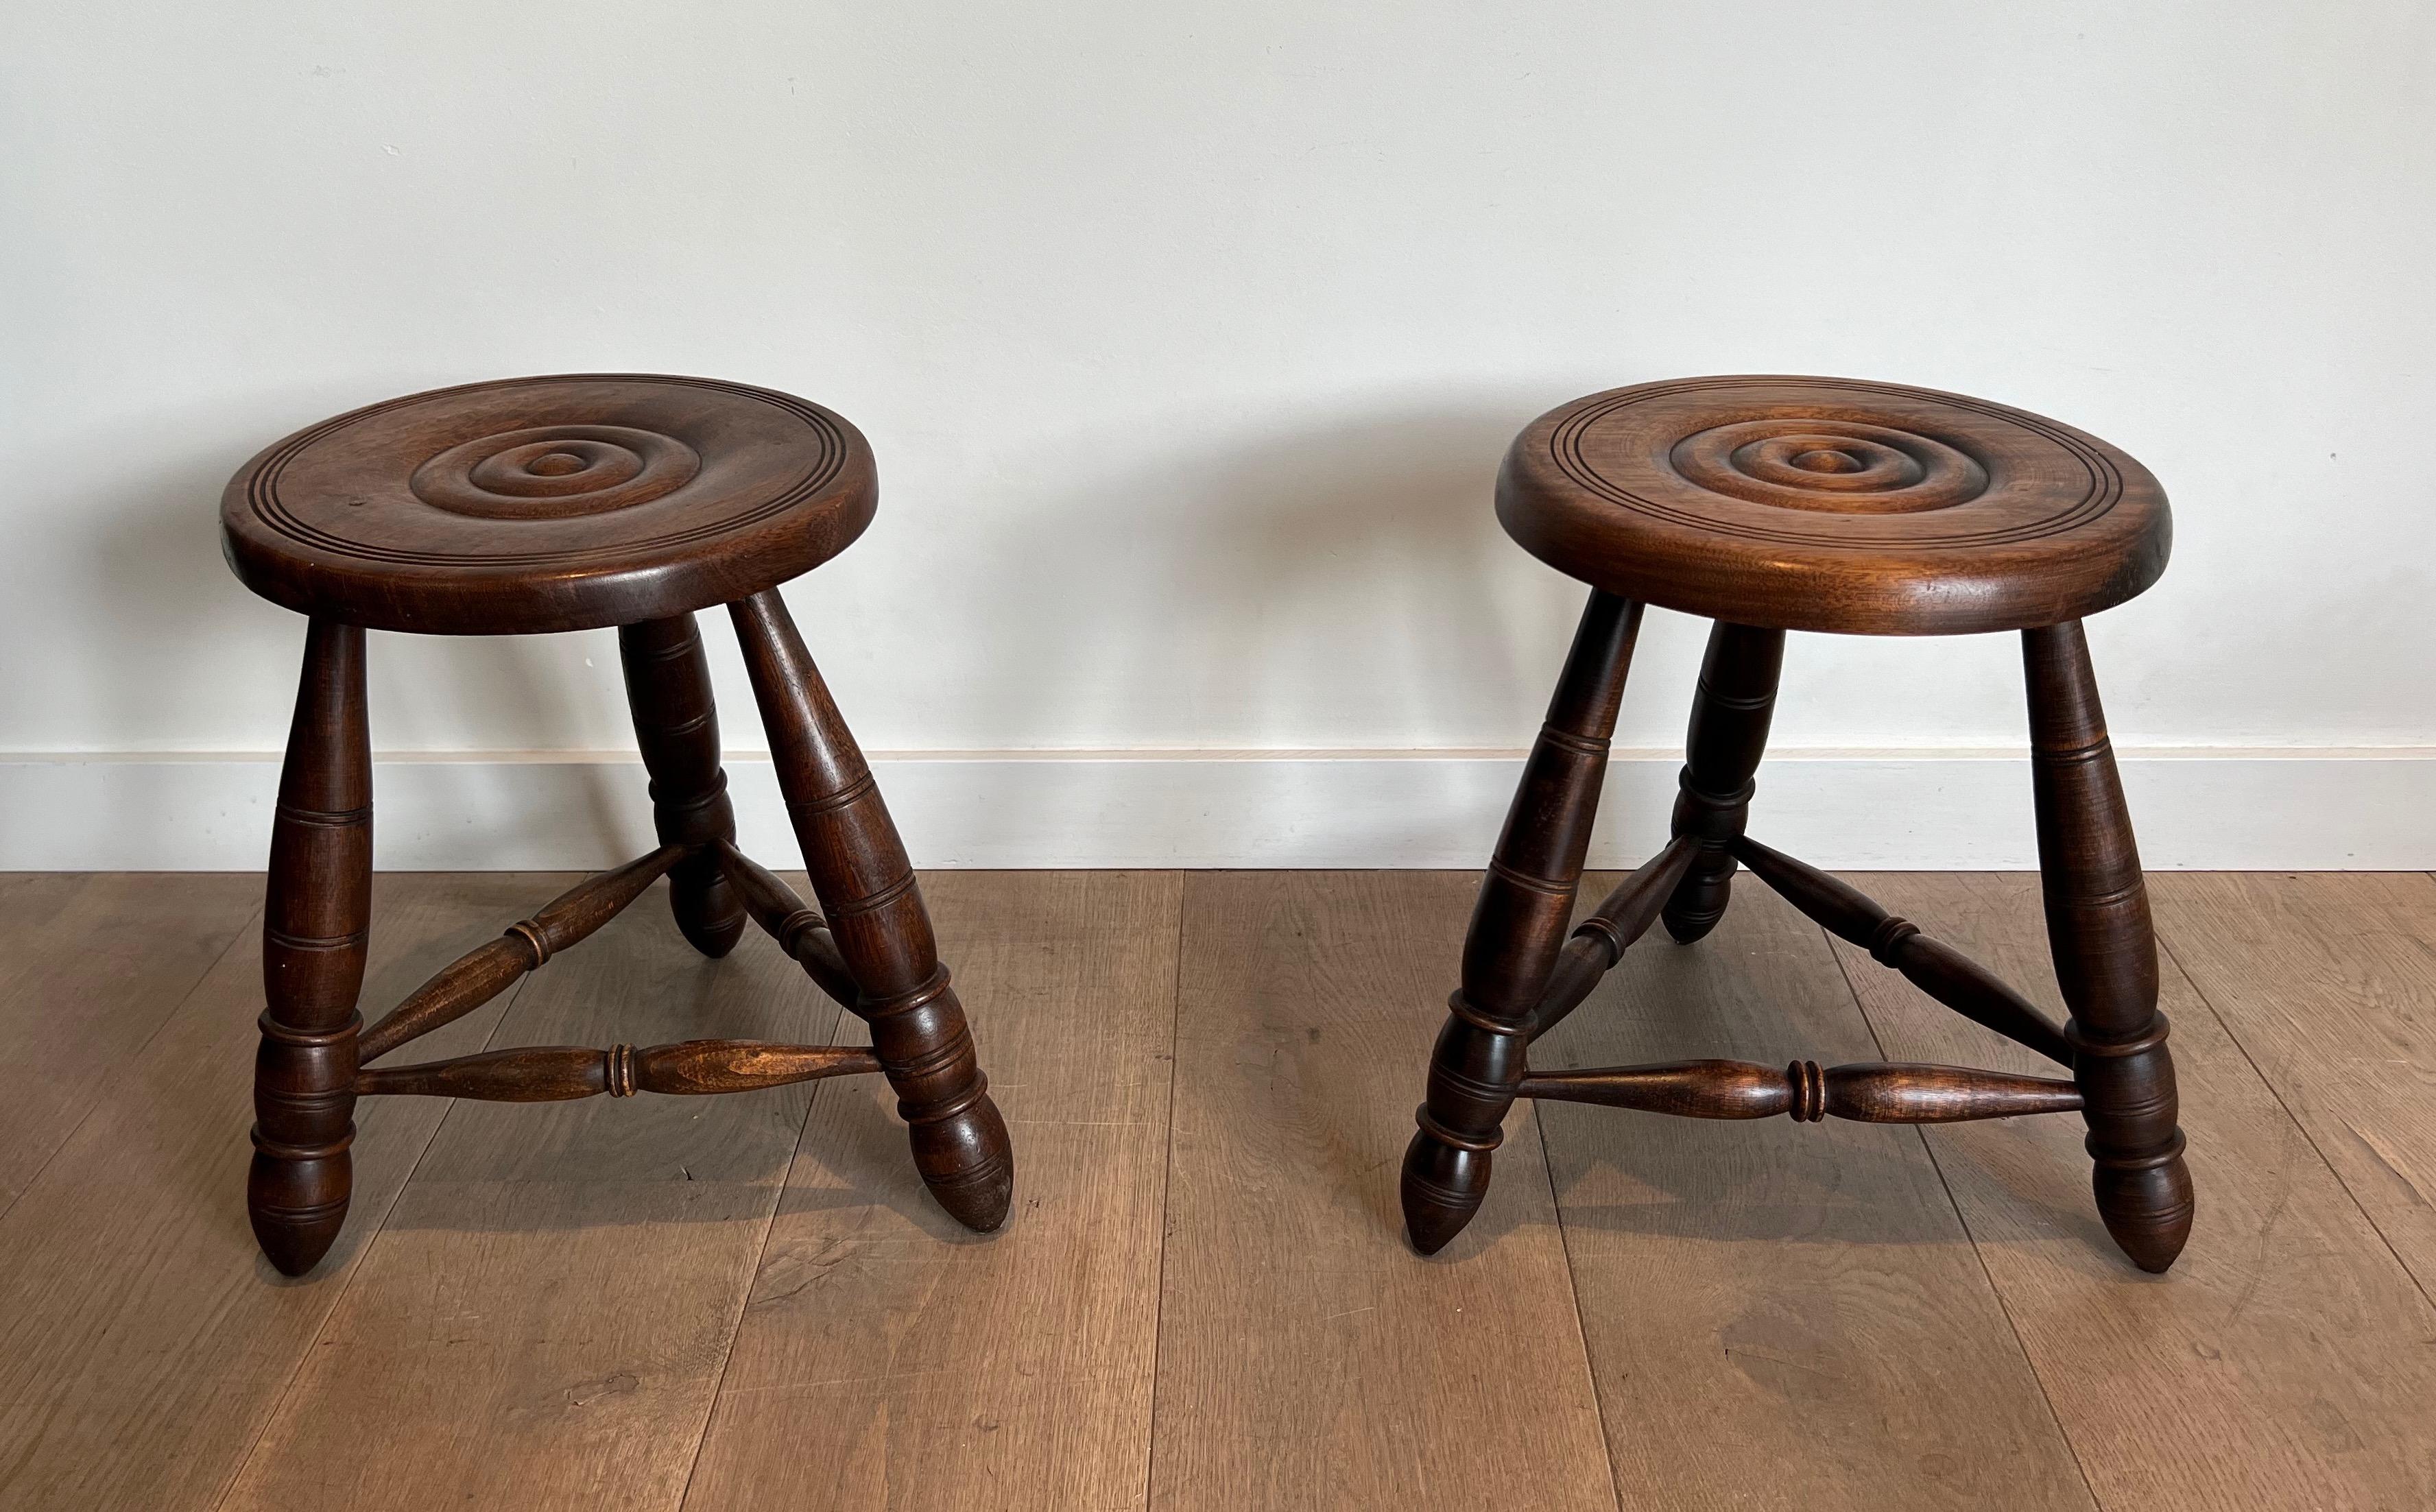 This very nice pair of stools are made of turned wood. This is a very nice design and a French work attributed to Charles Dudouyt, circa 1950.